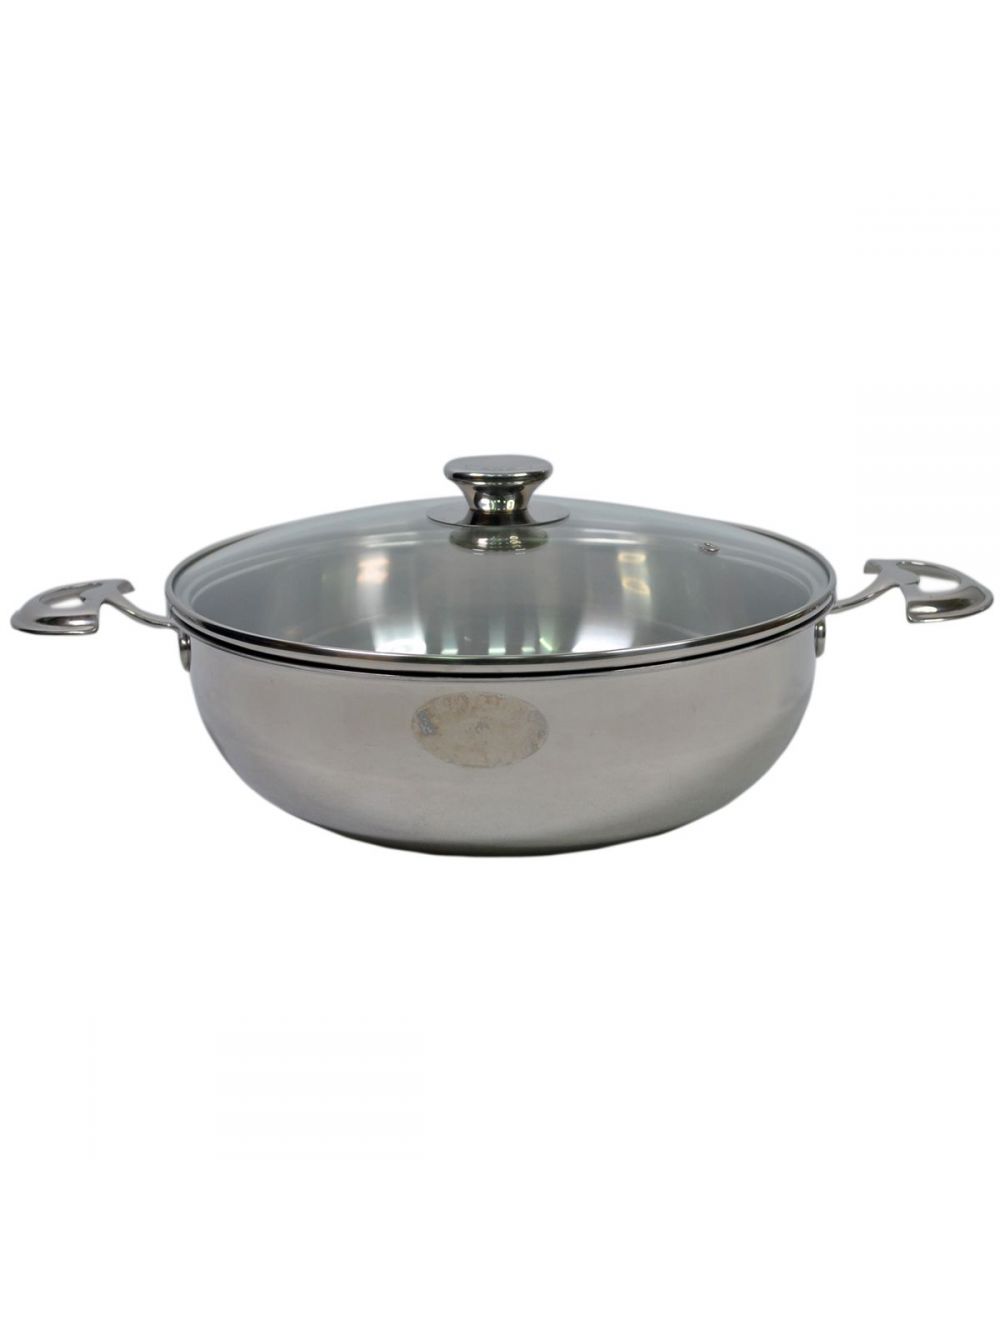 Silverstar Rocco Stainless Steel Casserole with Glass Lid 28 cm-K10067